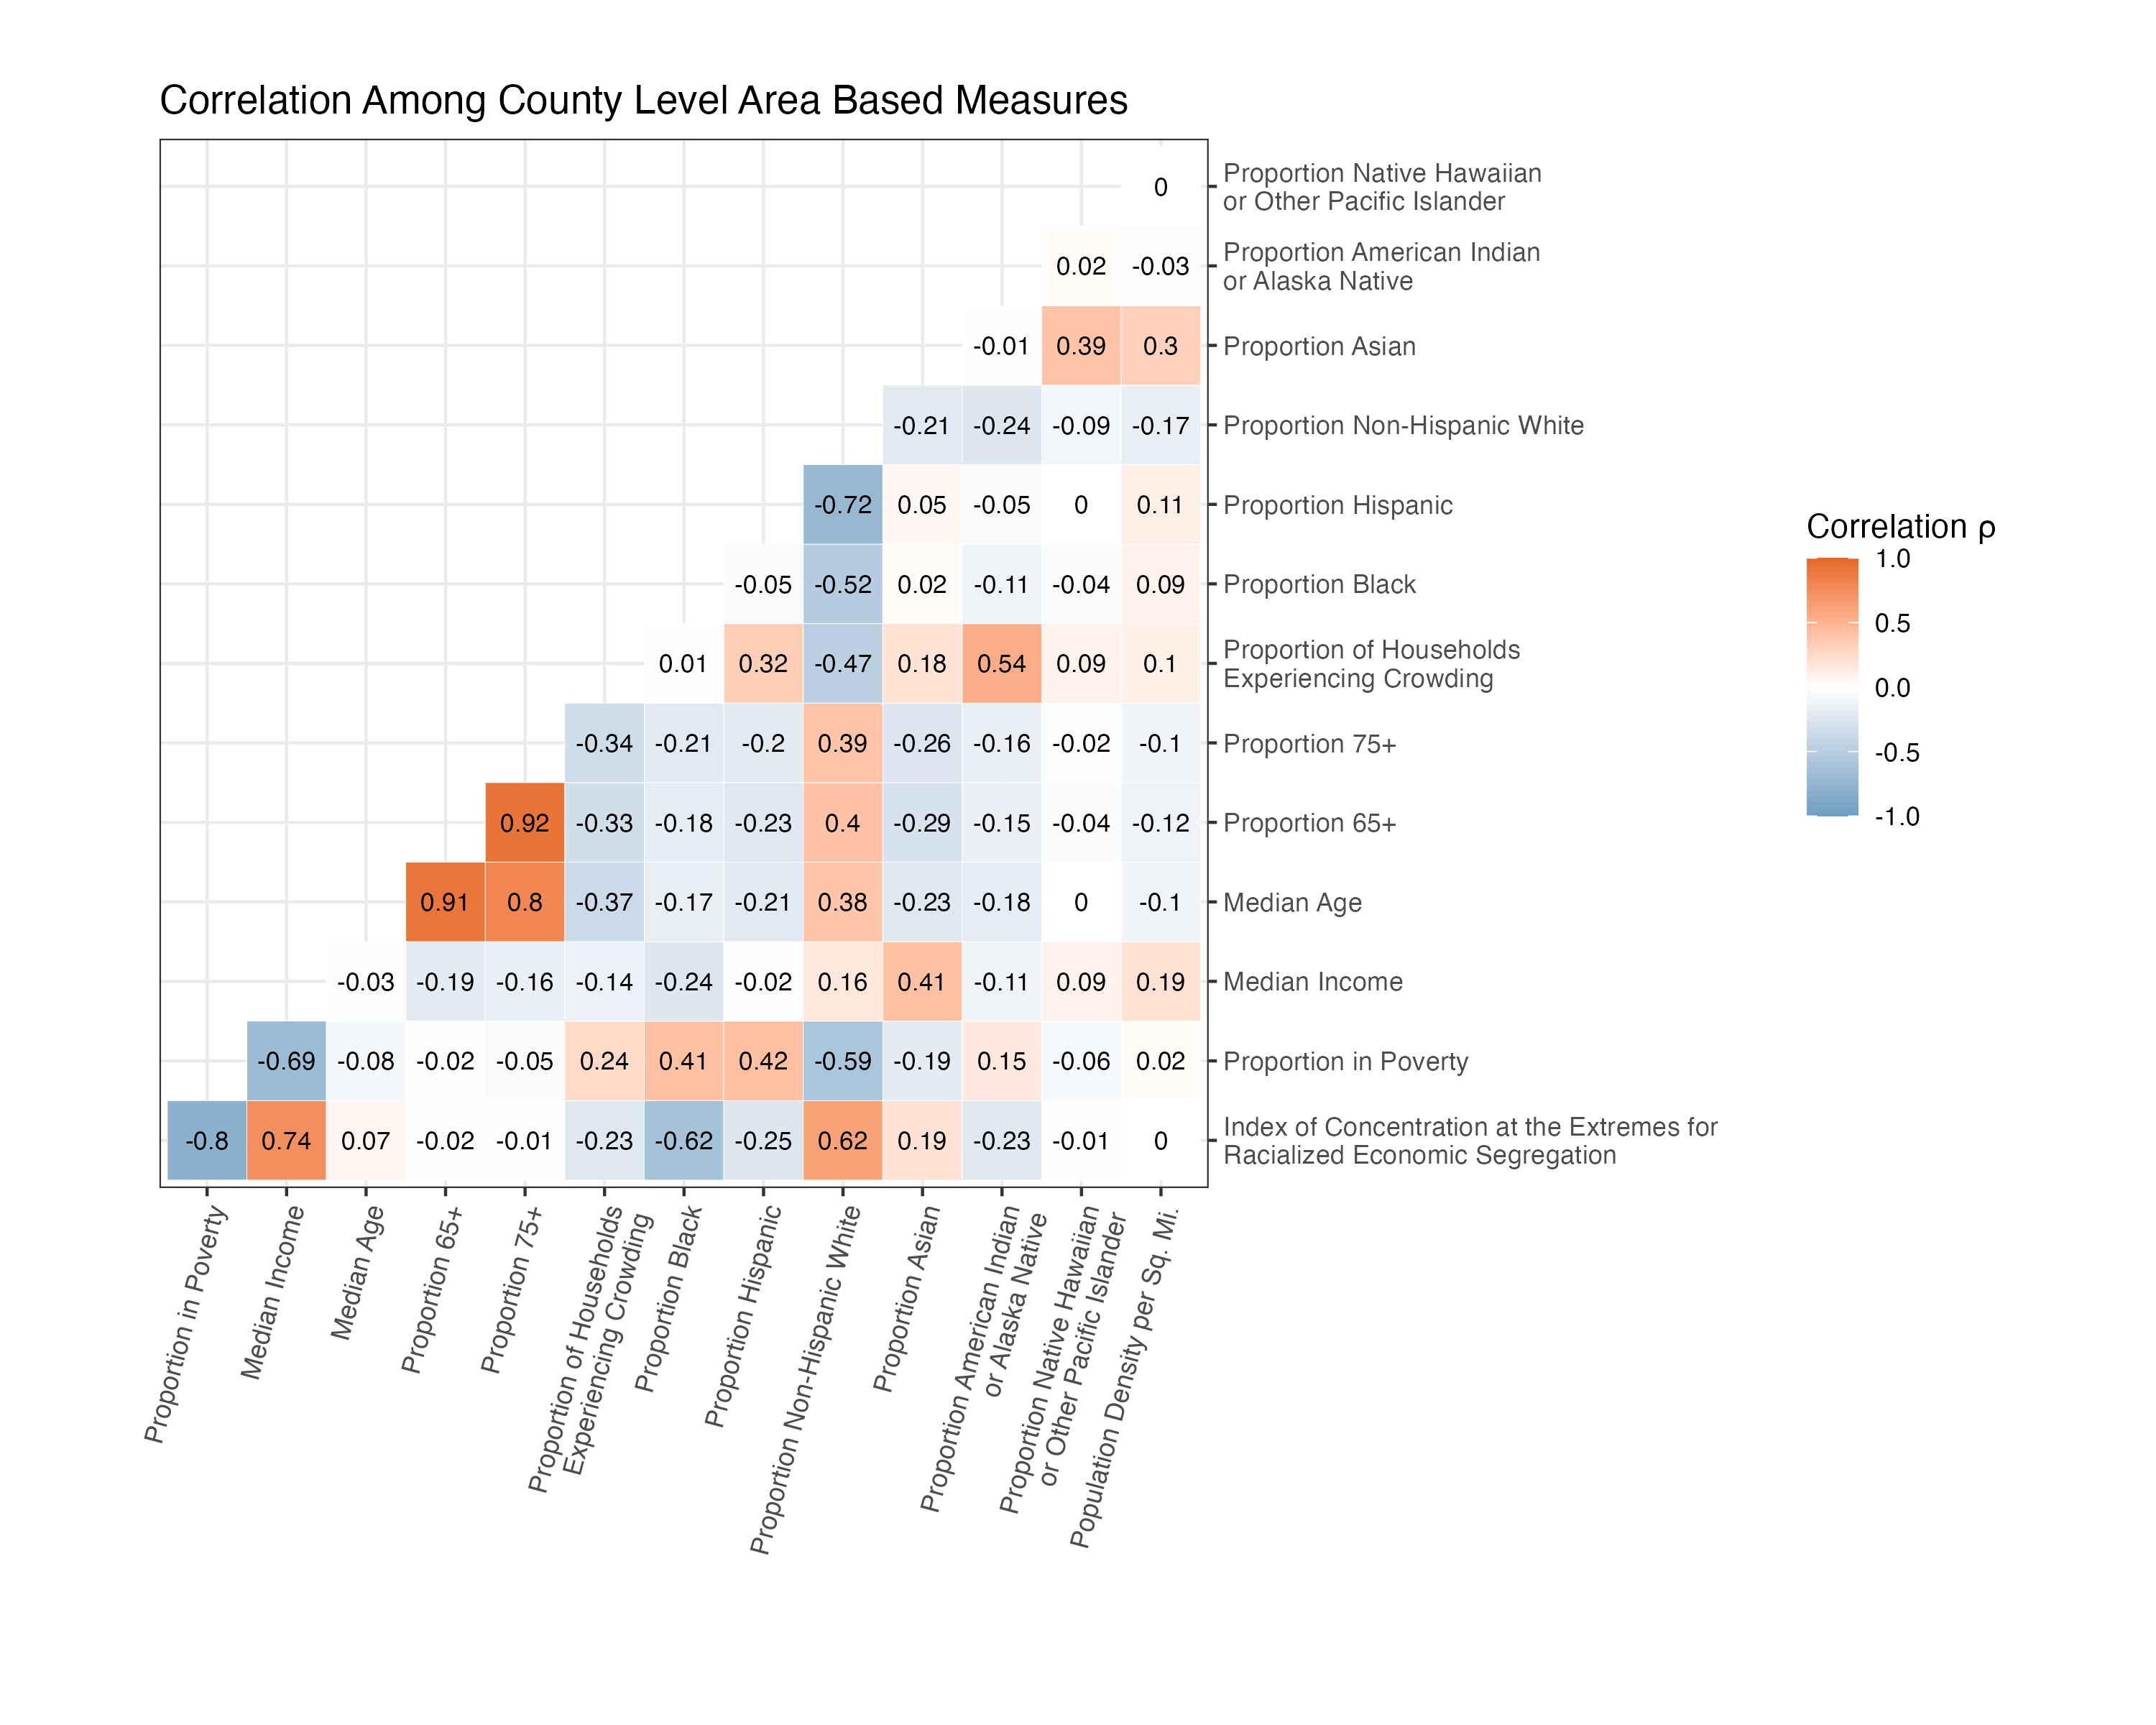 correlation matrix showing the similarity or dissimilarity between the county level variables considered